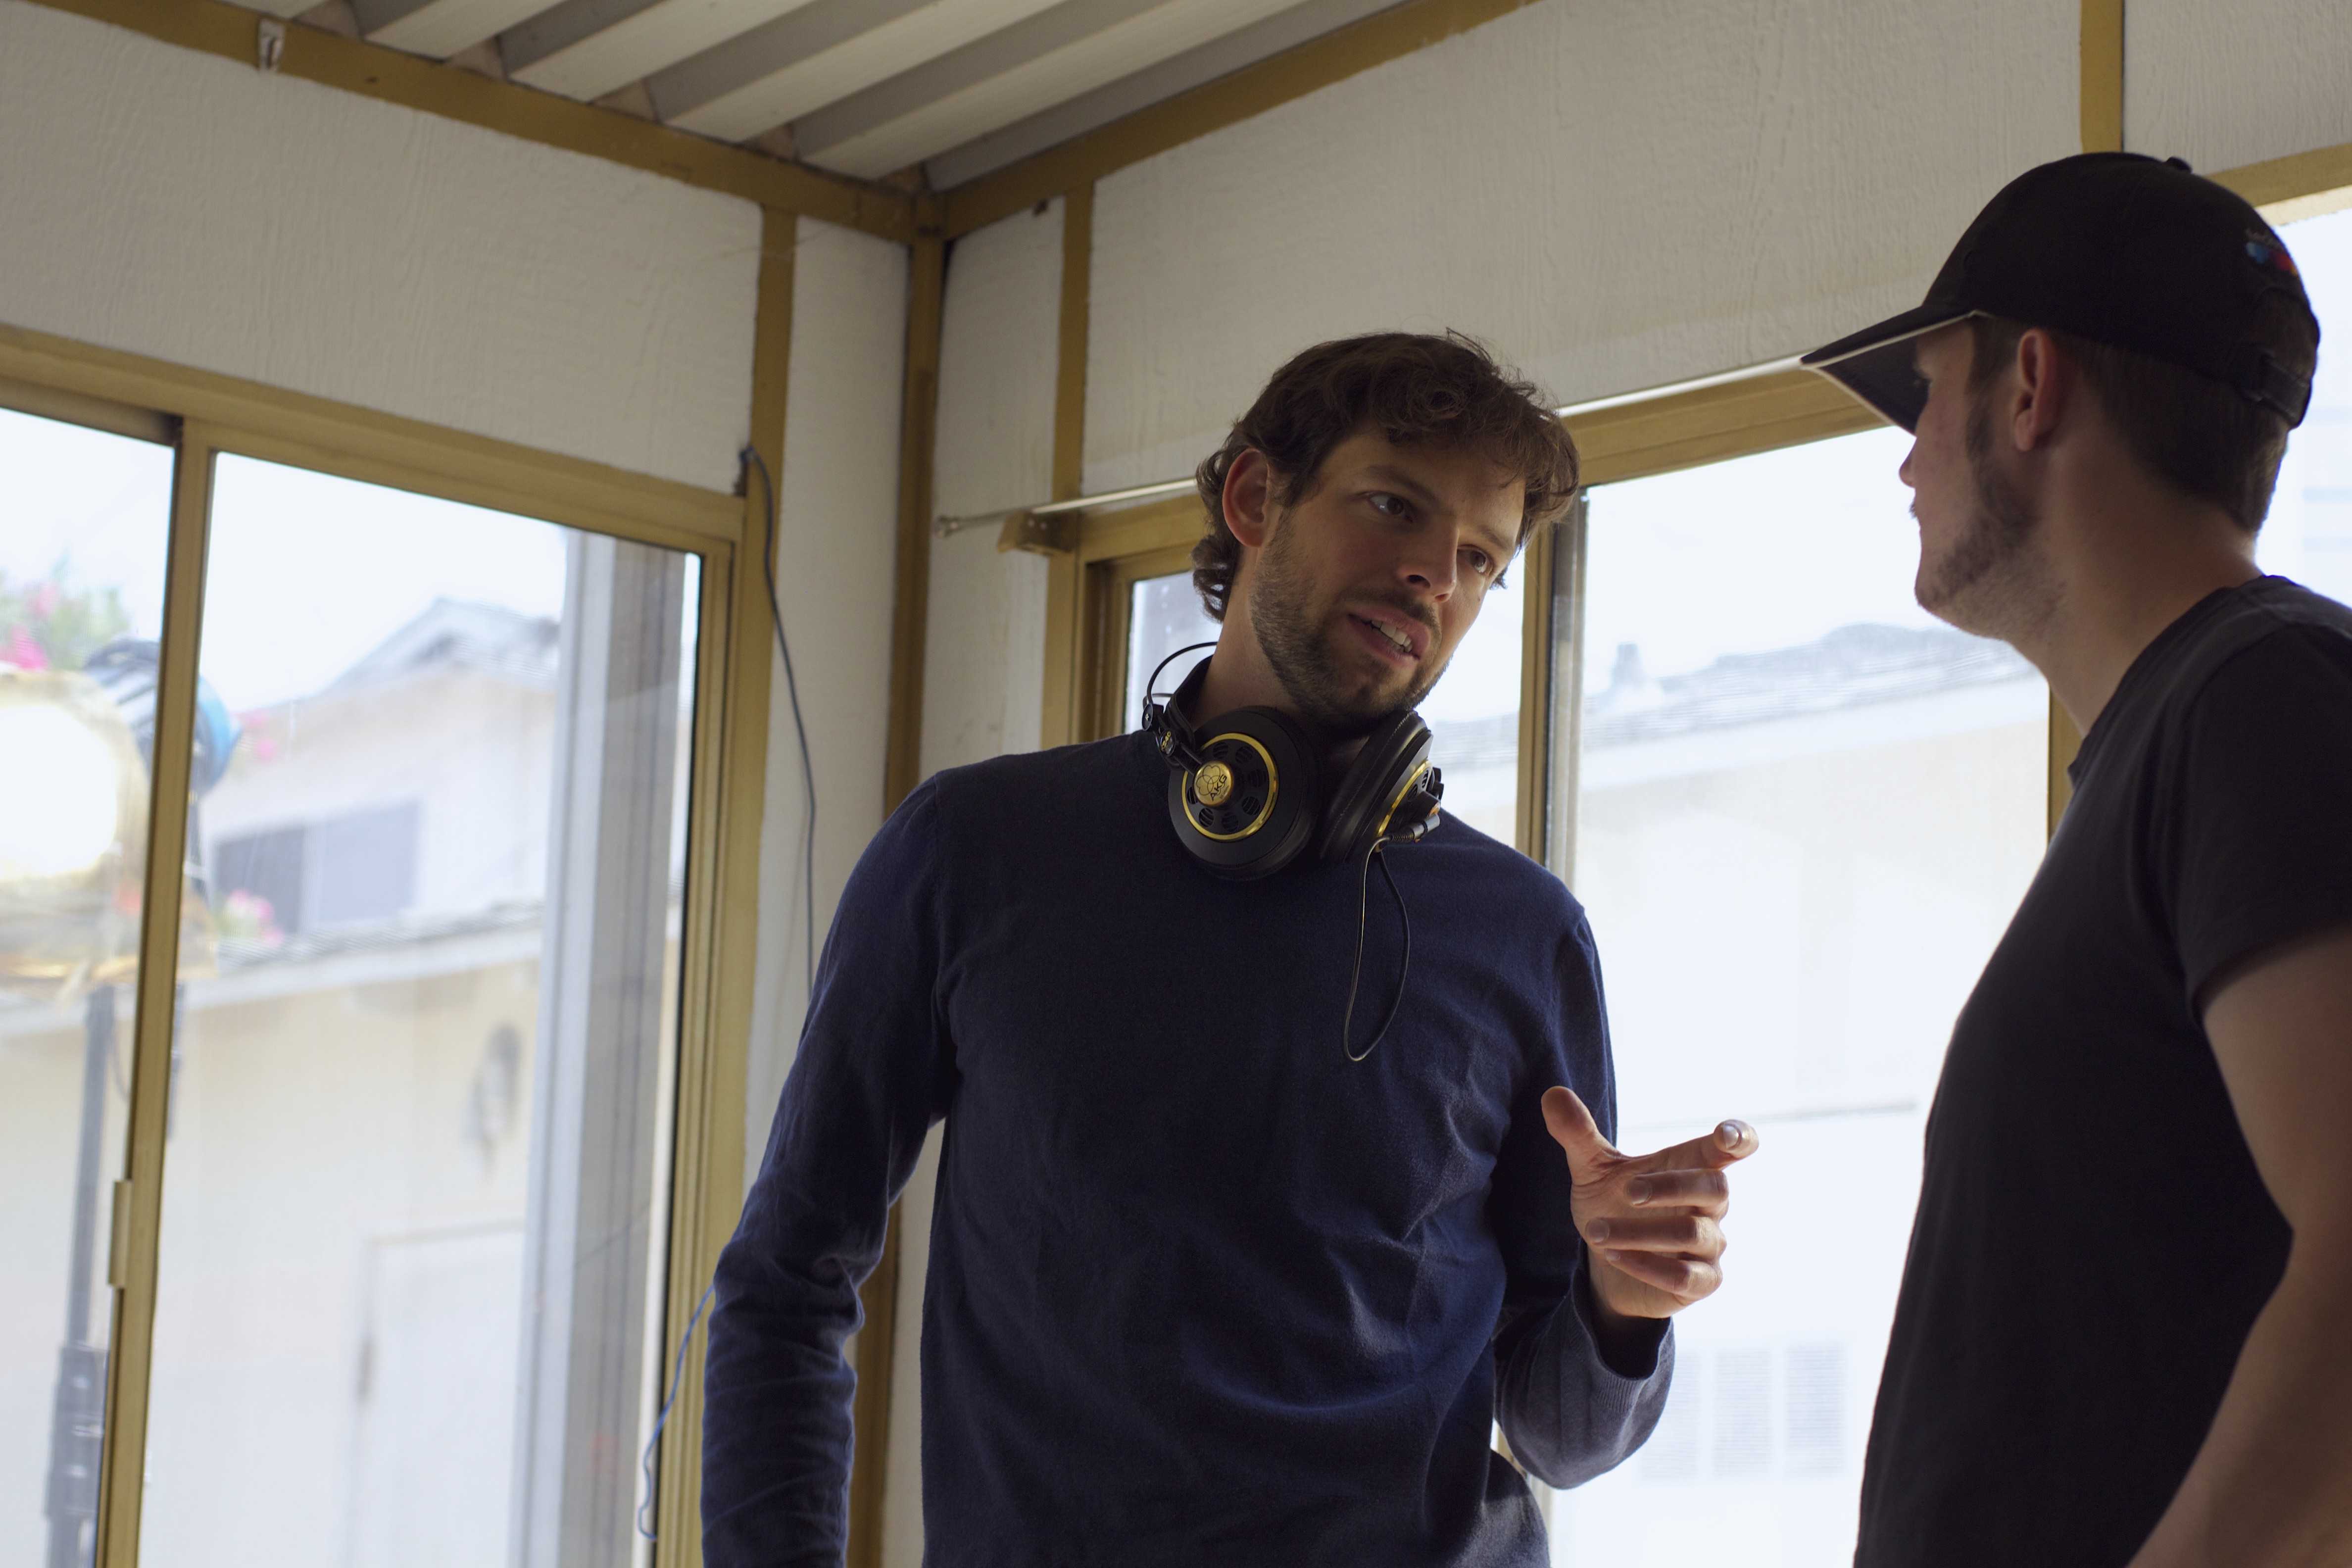 Andreas Graf discussing a scene with cinematographer Austin Nordell